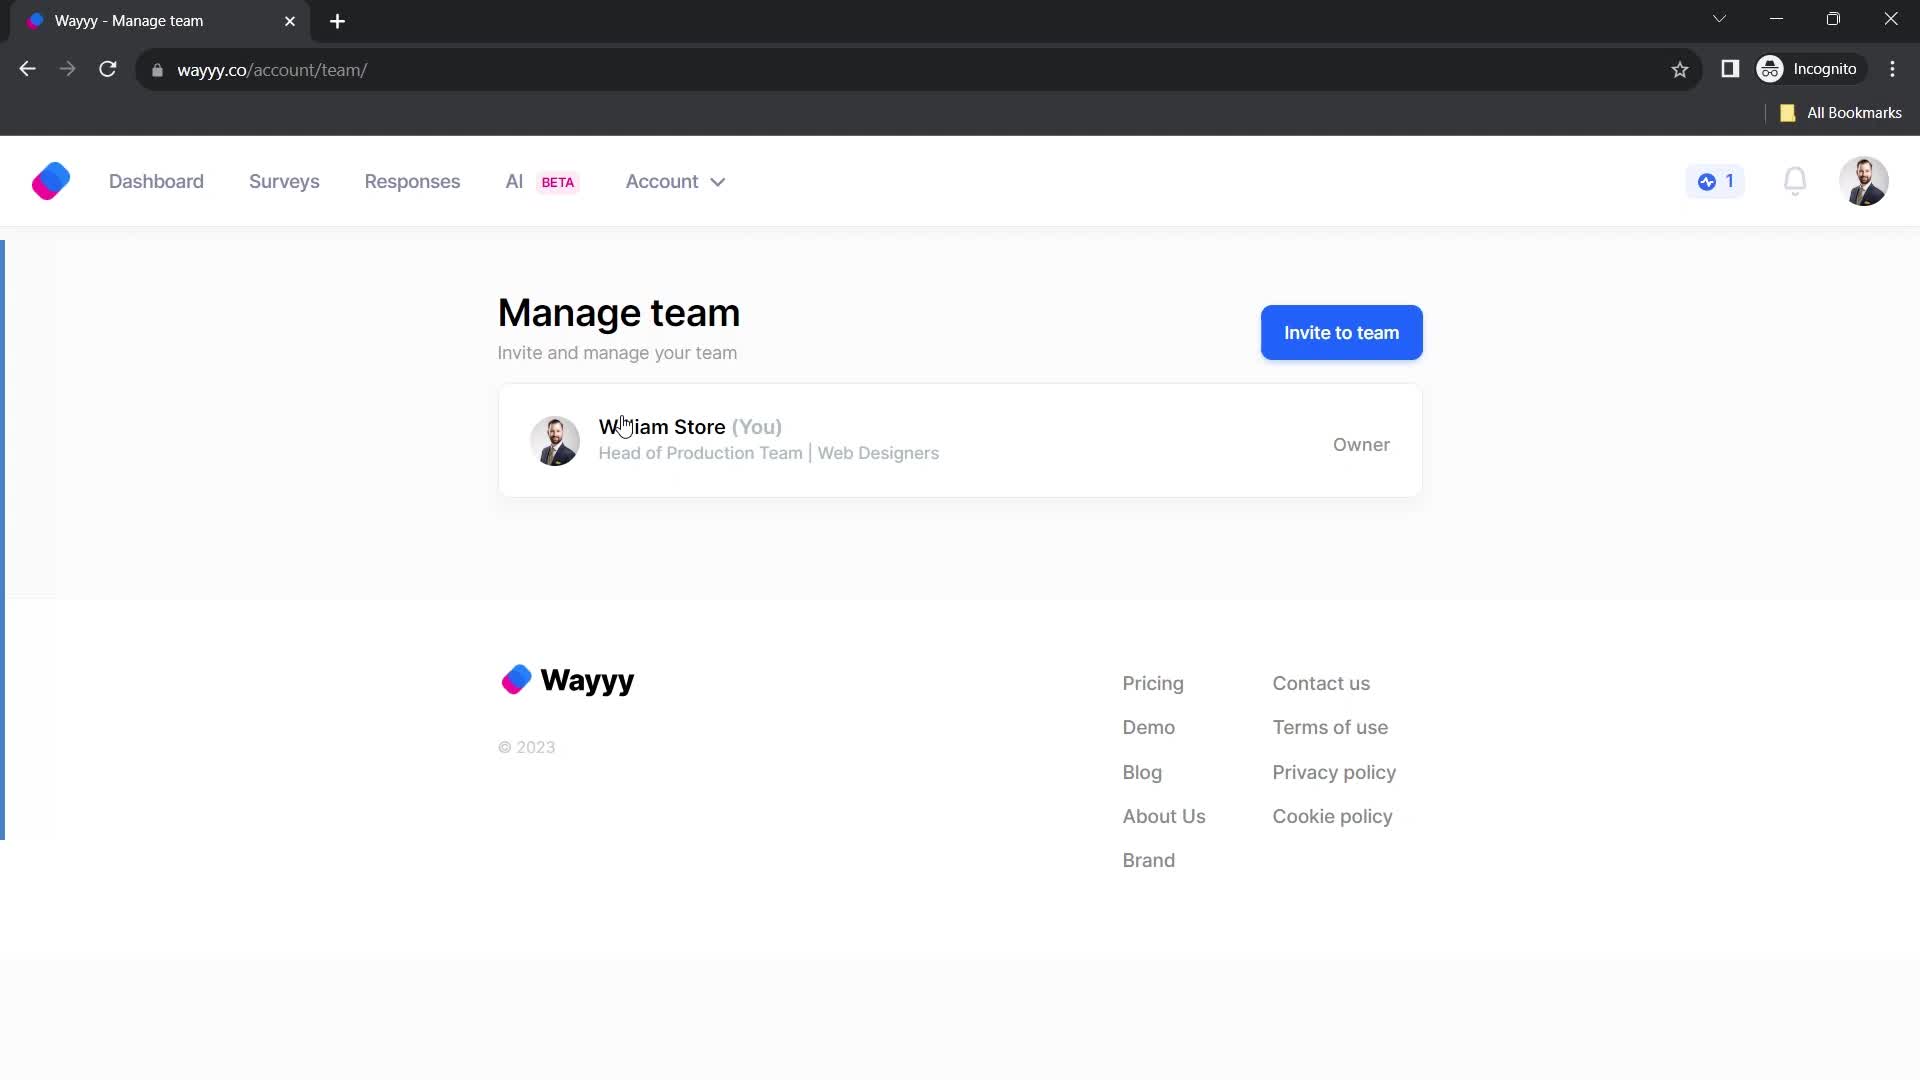 Screenshot of Manage team on Inviting people on Wayyy user flow